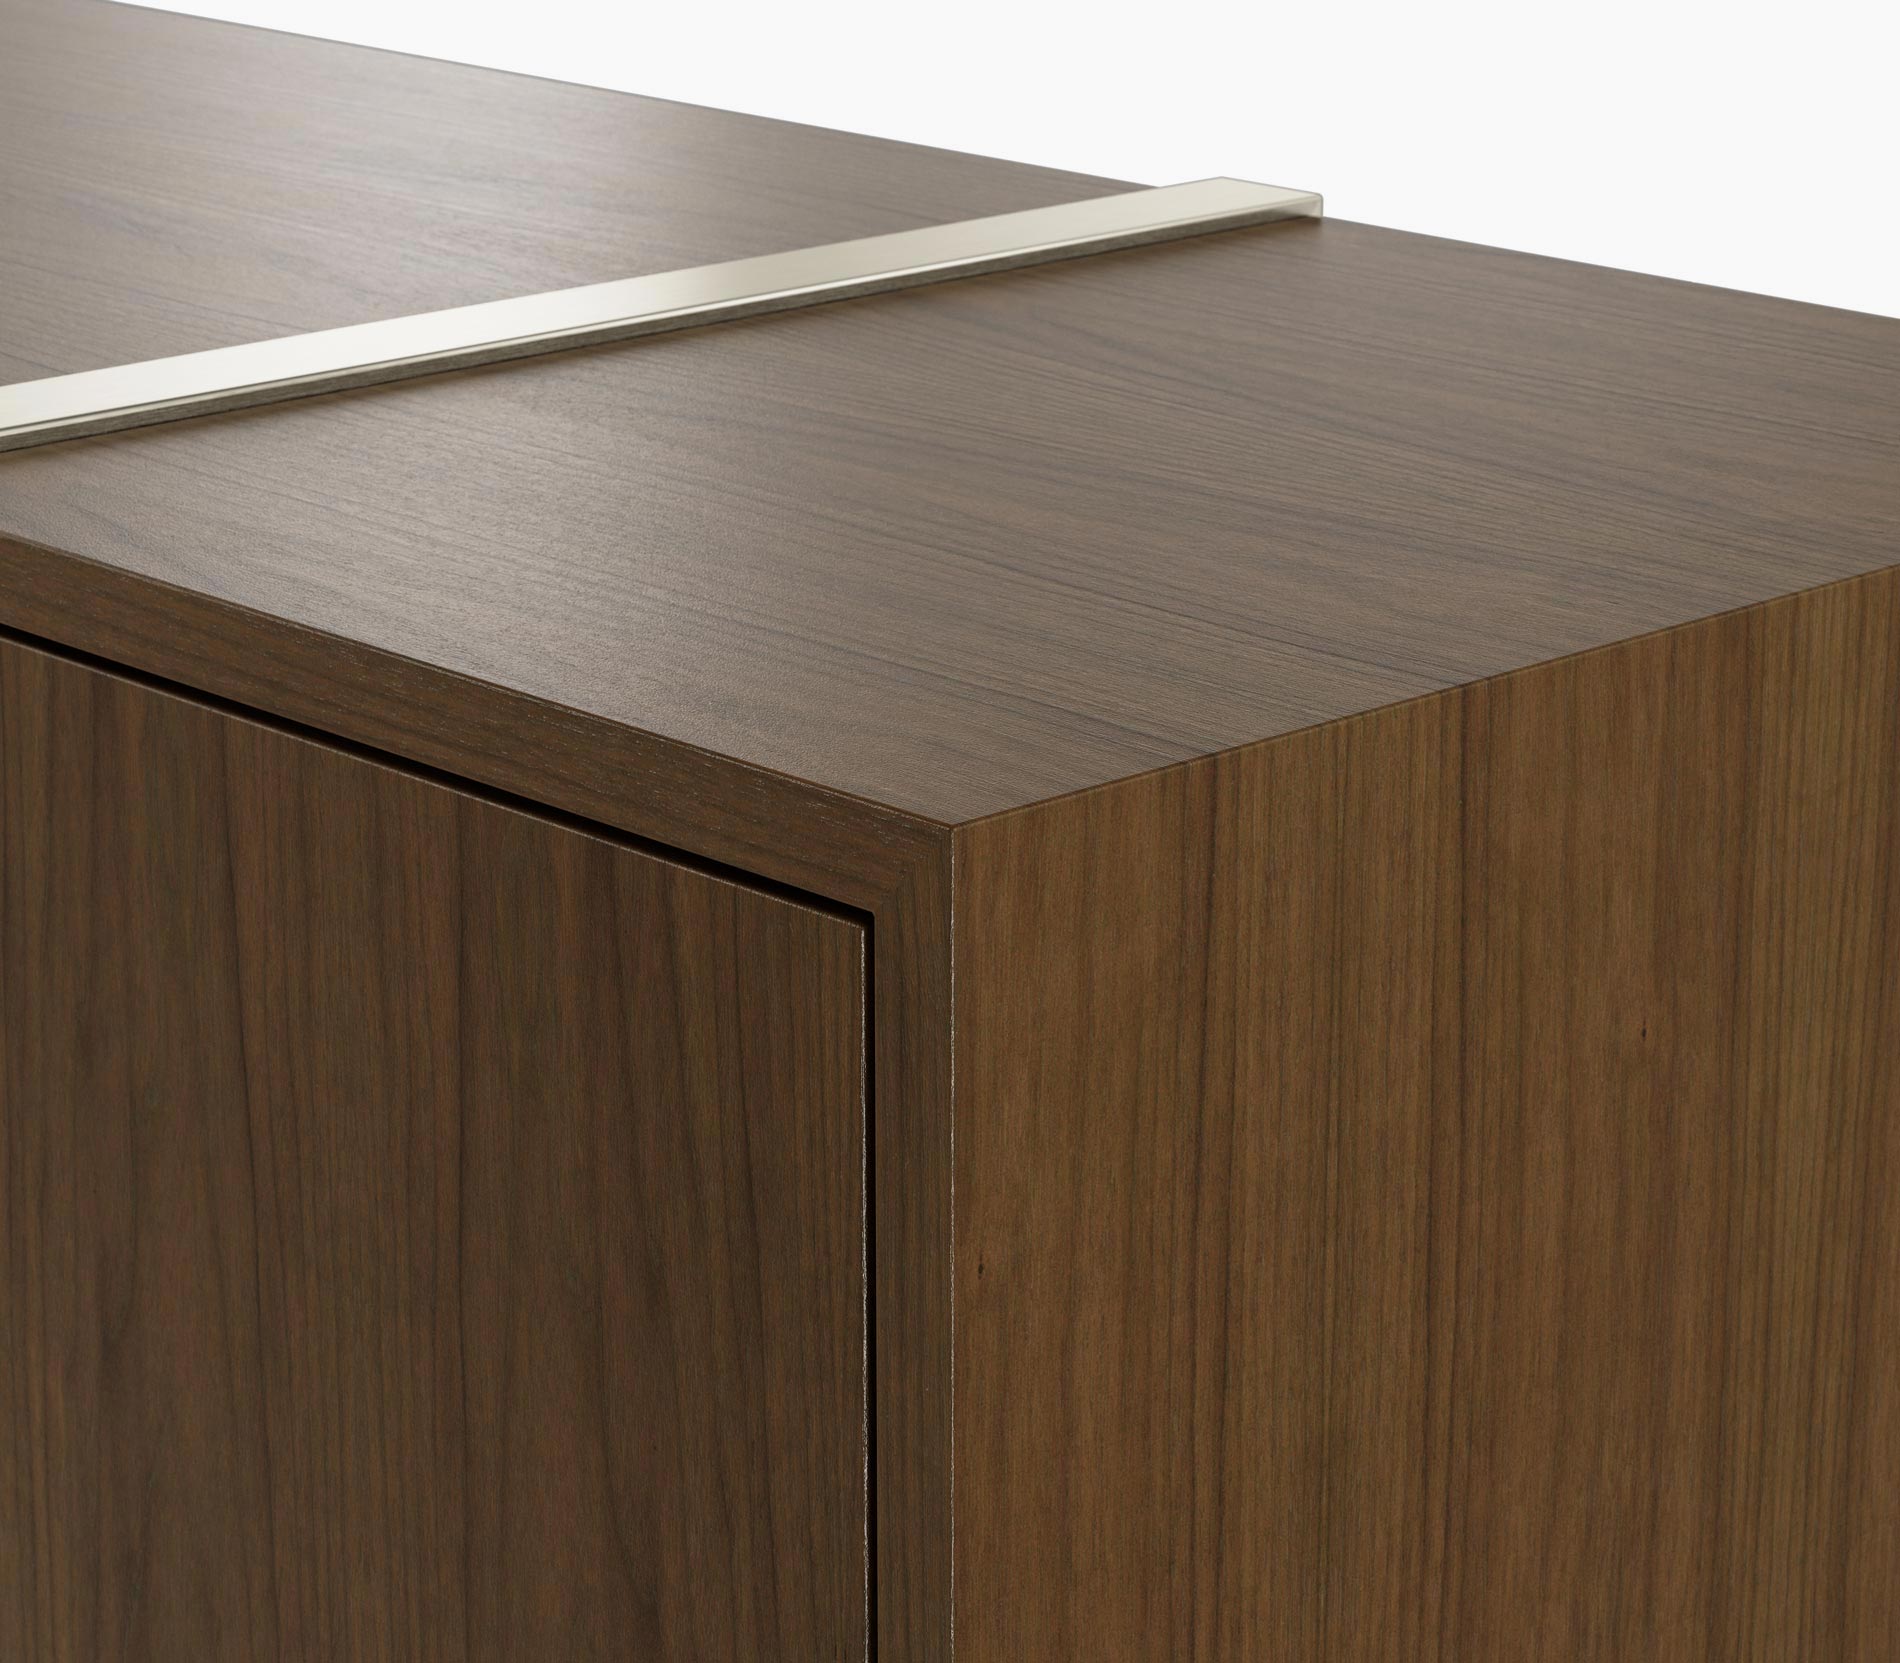 Edge detail of a Highline Credenza in natural flat cut walnut